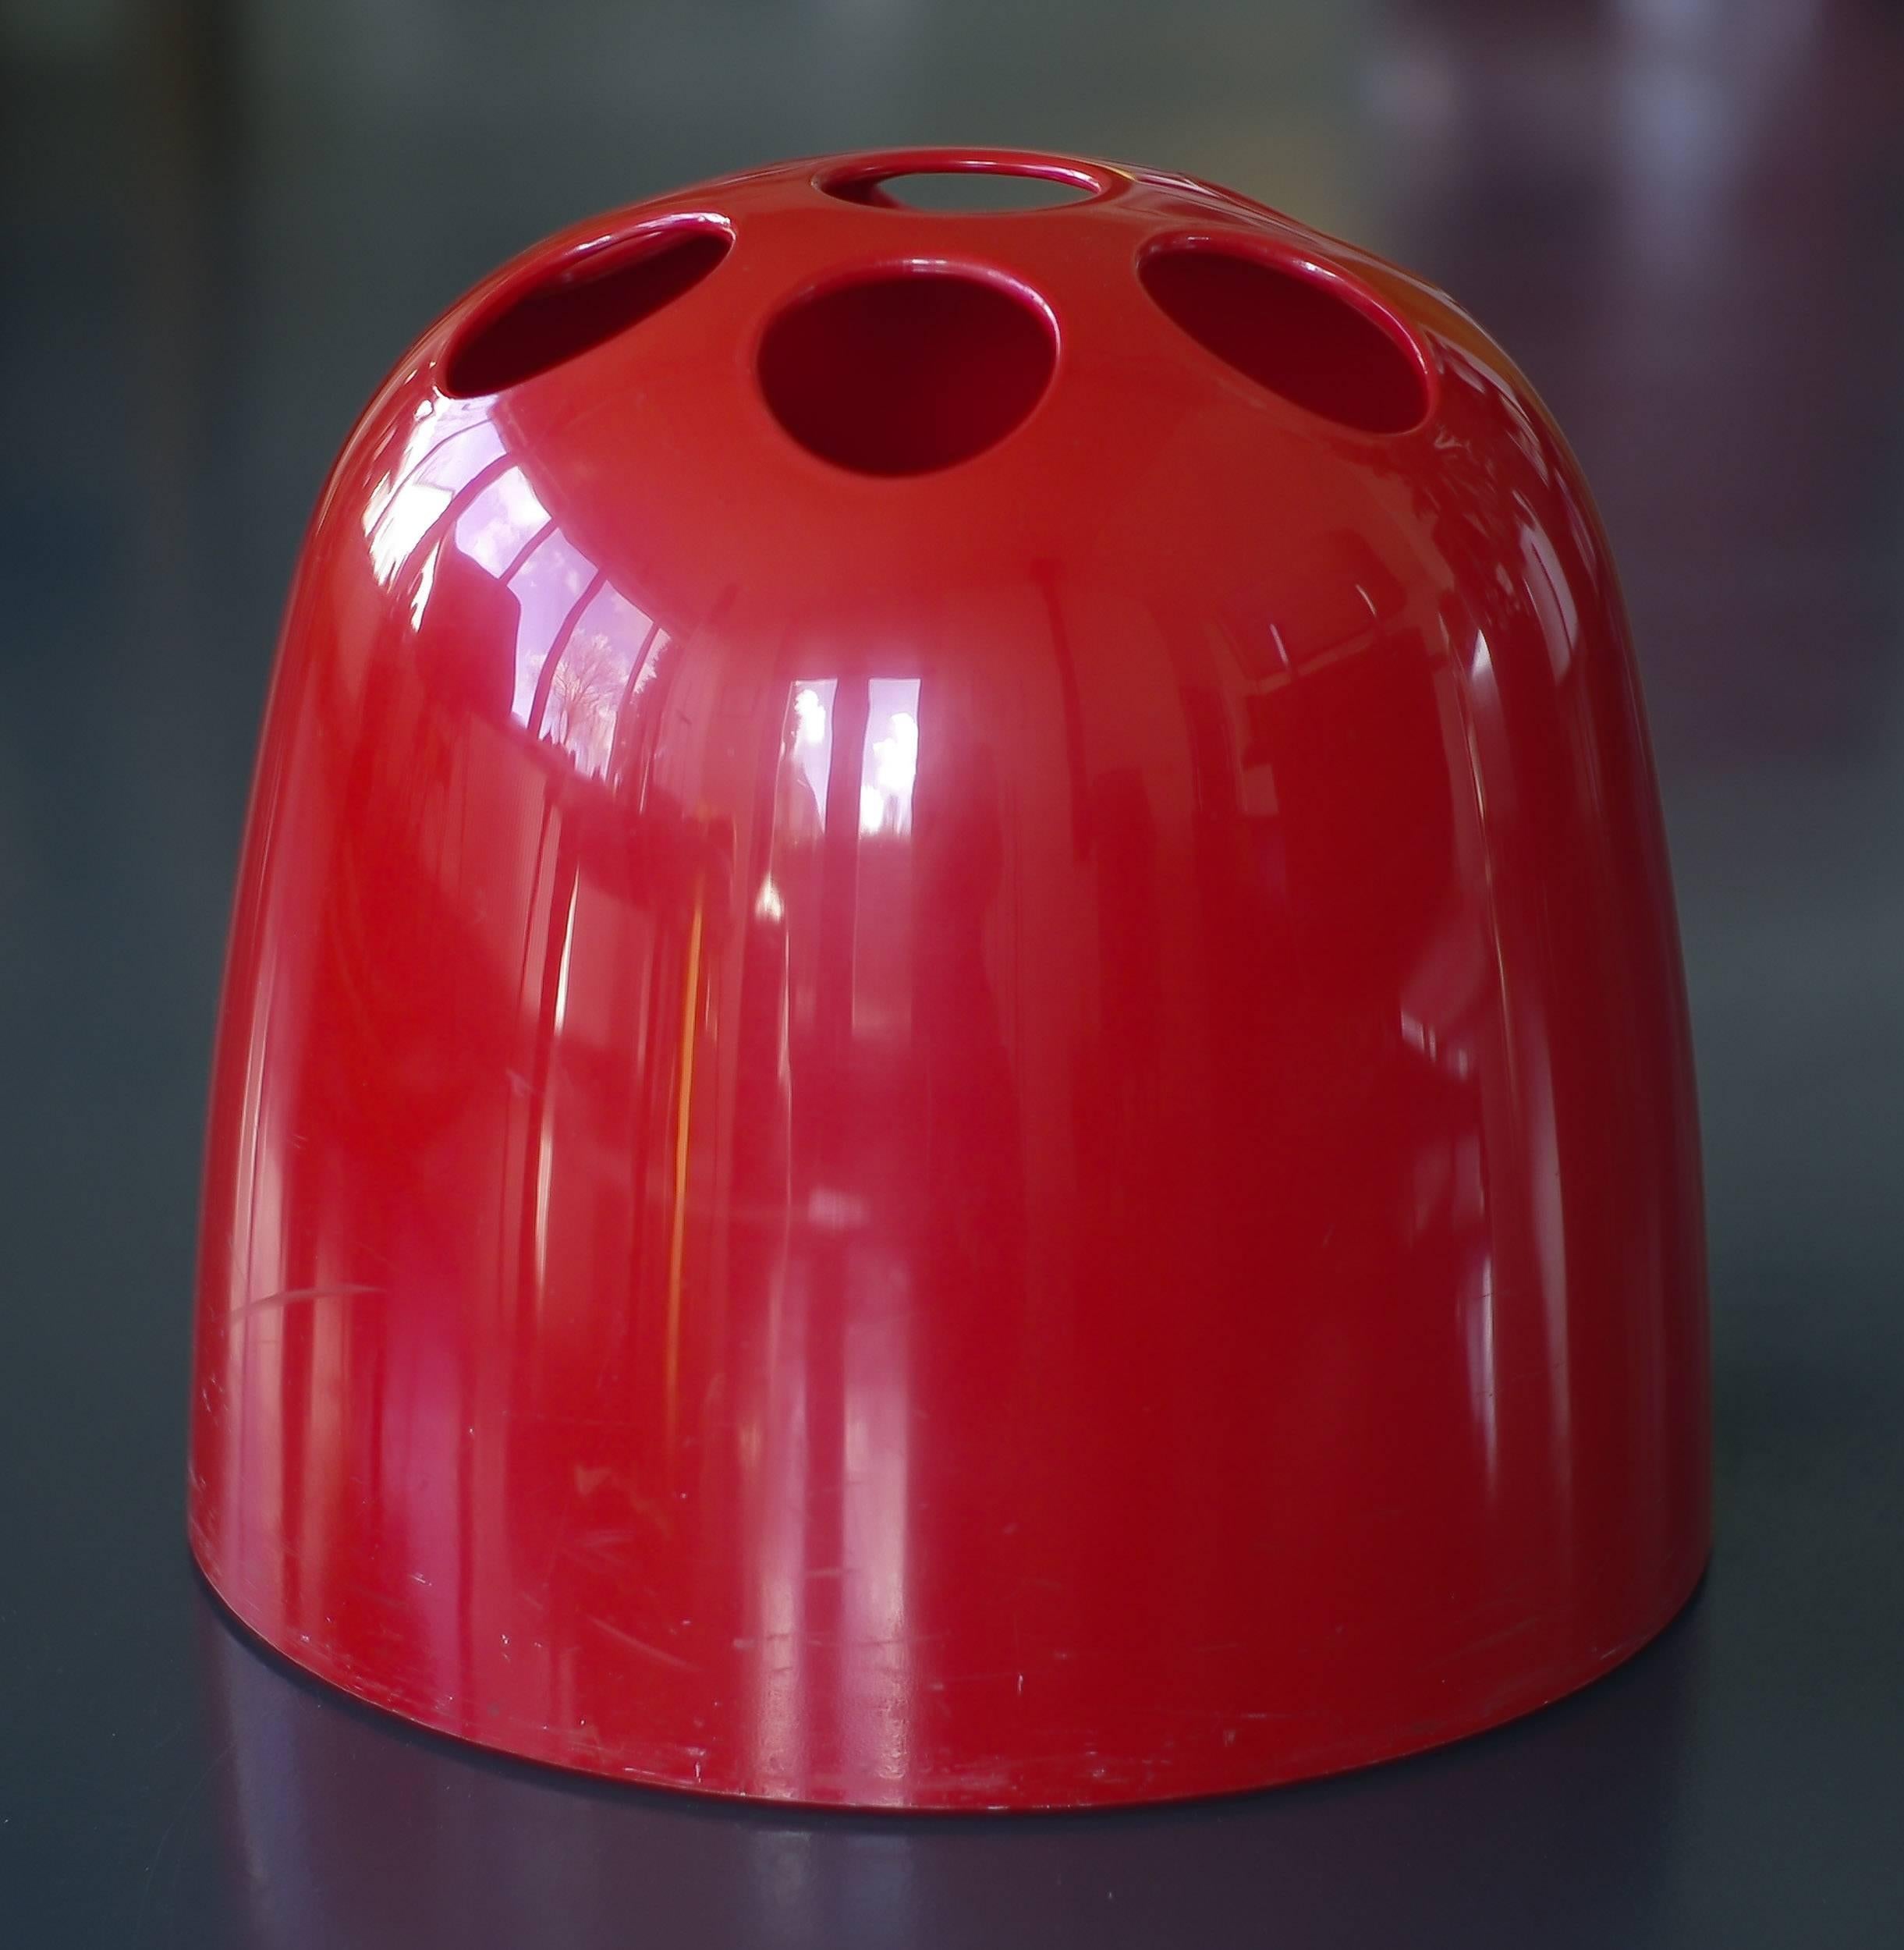 Rare red Dedalo umbrella stand designed by Emma Gismondi Schweinberger for Artemide in very good condition.

Free worldwide shipping.